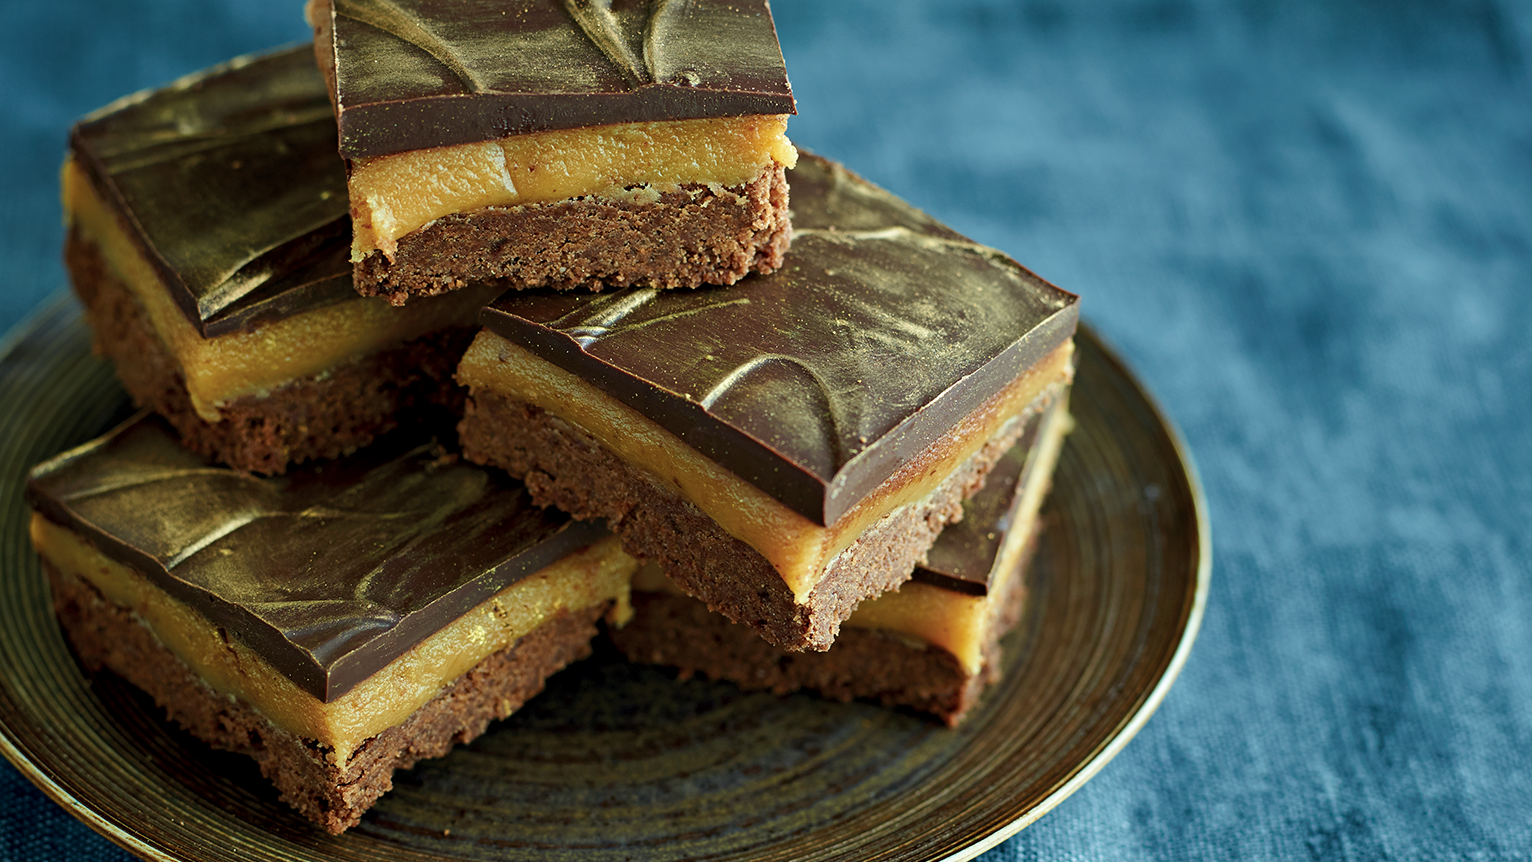 Deliciously Chocolatey Cakes & Bakes: 3 traybake recipes that are perfect for a 3pm pick-me-up